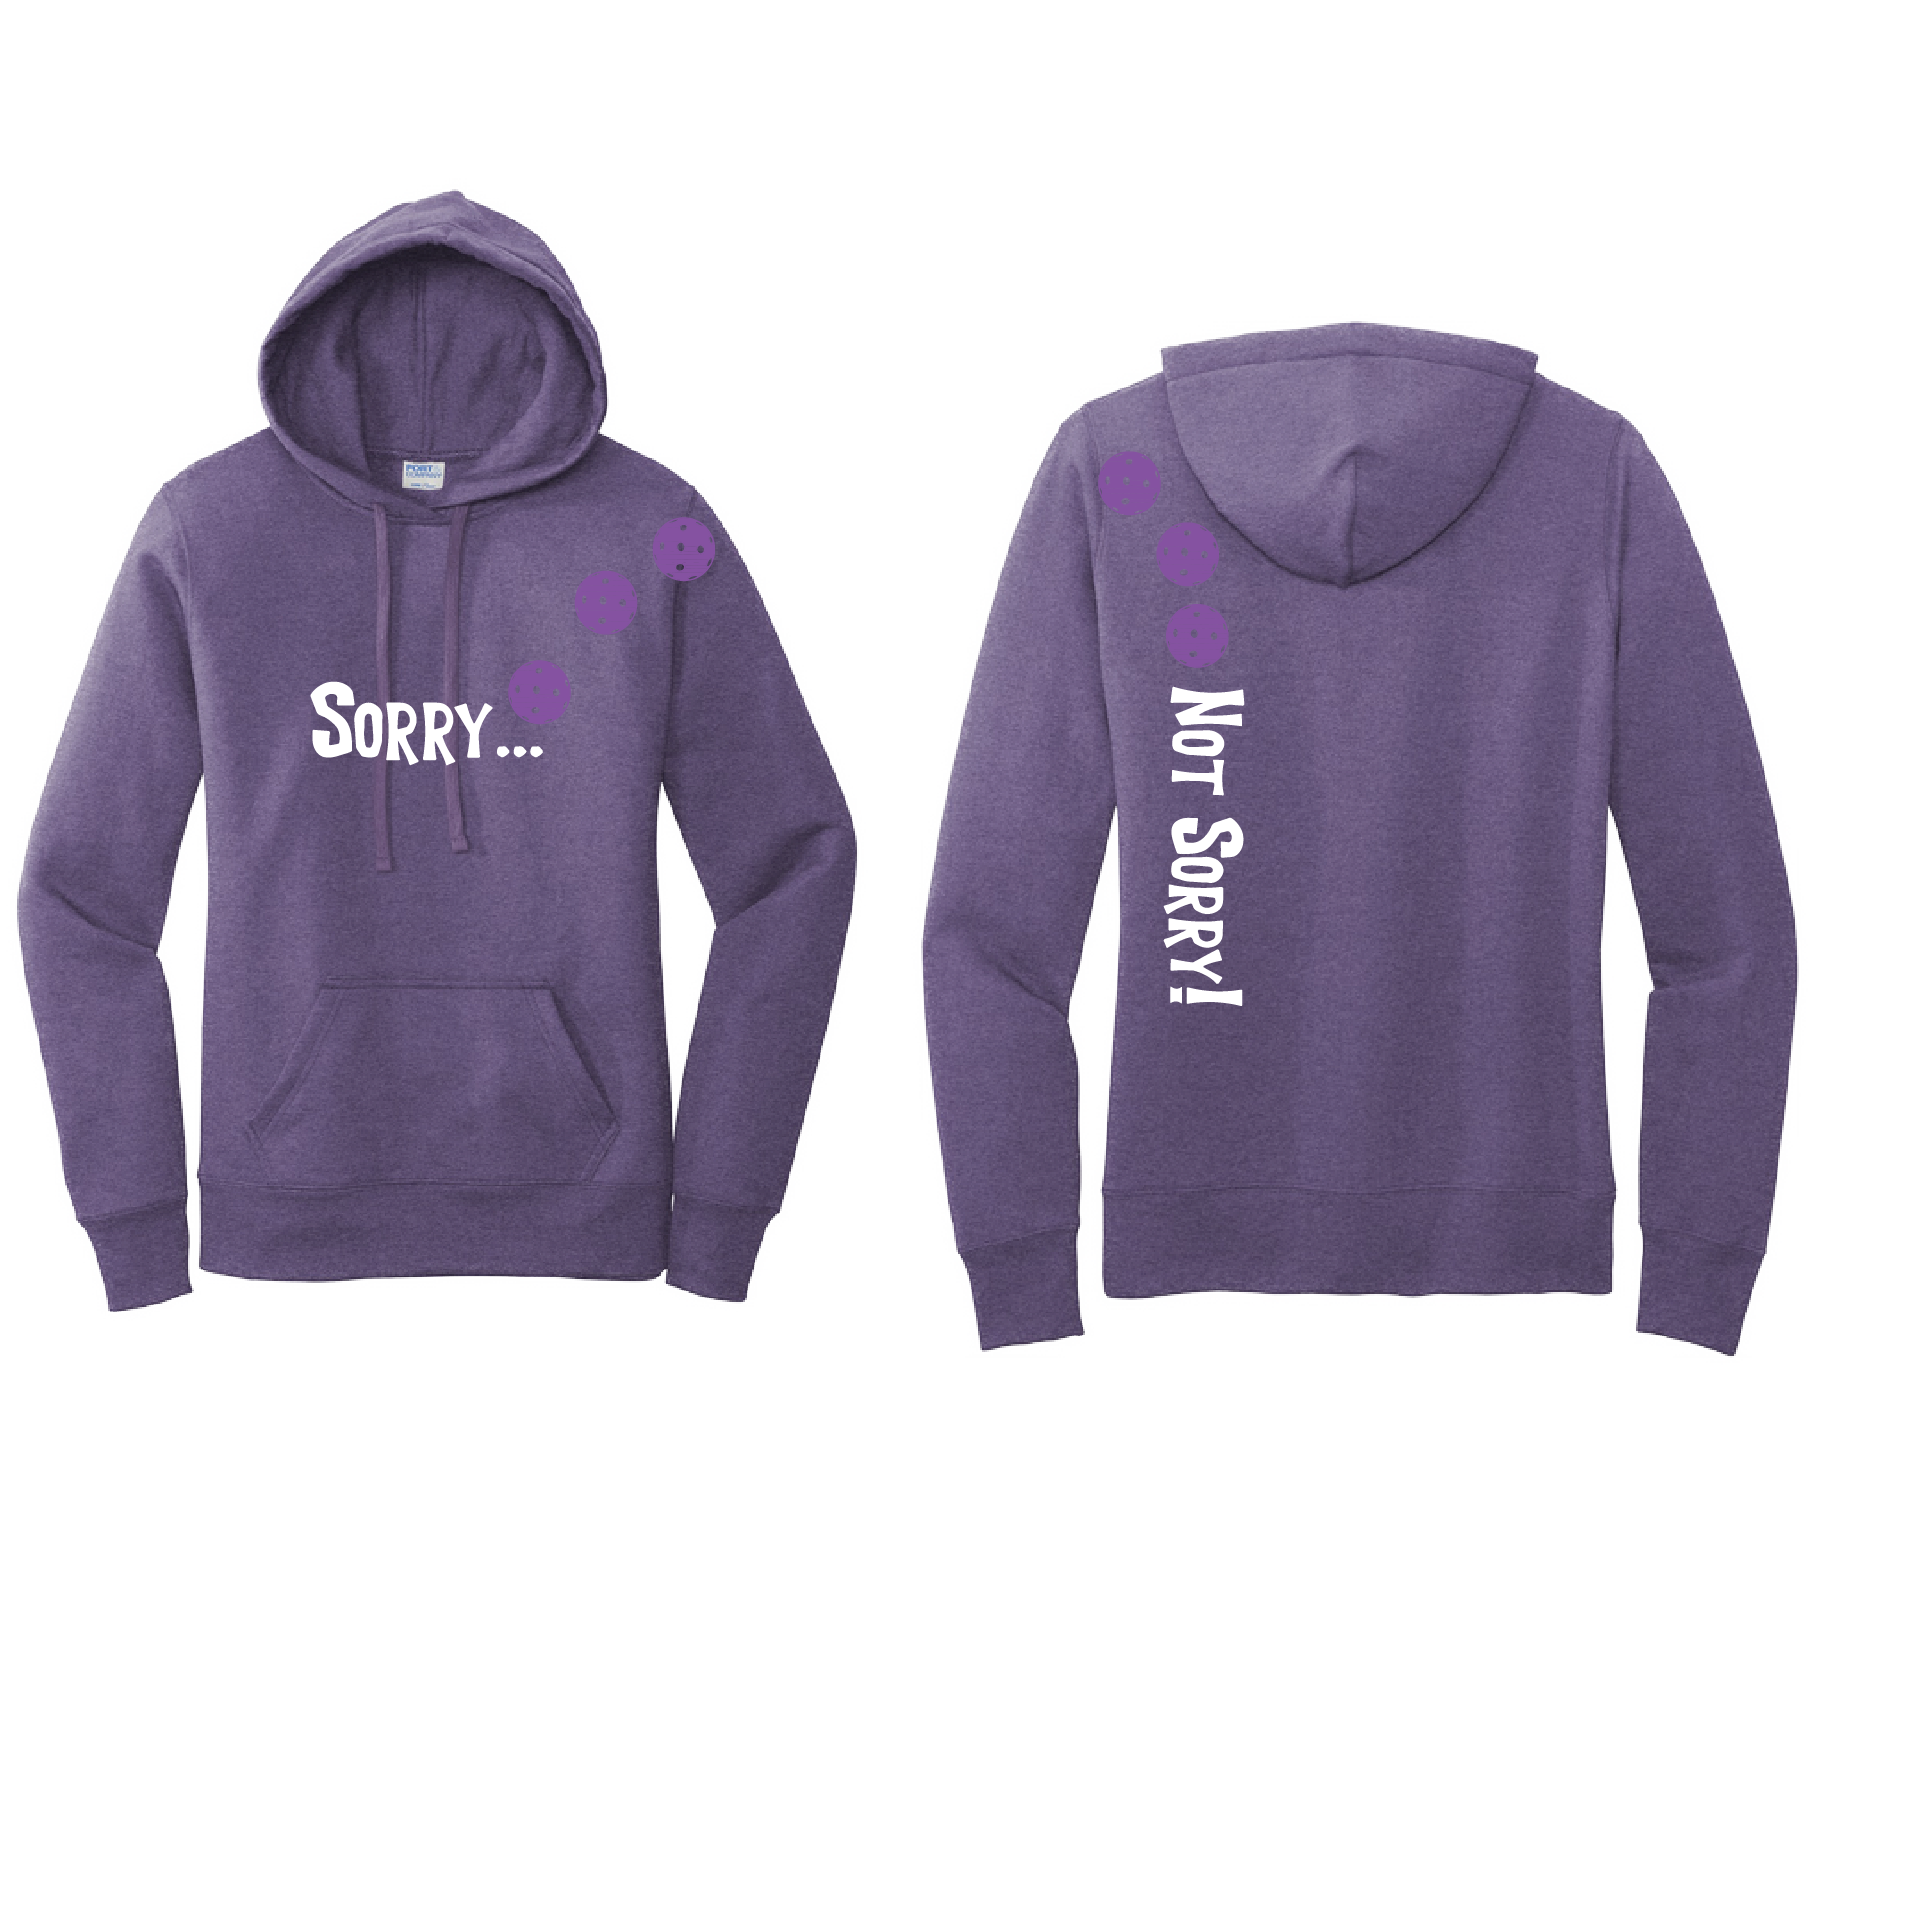 Pickleball Design: Sorry...Not Sorry!! with Customizable Ball Color - Choose: Cyan, Orange, Purple or Rainbow Style: Women's Hooded pullover Sweatshirt Turn up the volume in this Women's Sweatshirts with its perfect mix of softness and attitude. Ultra soft lined inside with a lined hood also. This is fitted nicely for a women's figure. Front pouch pocket.